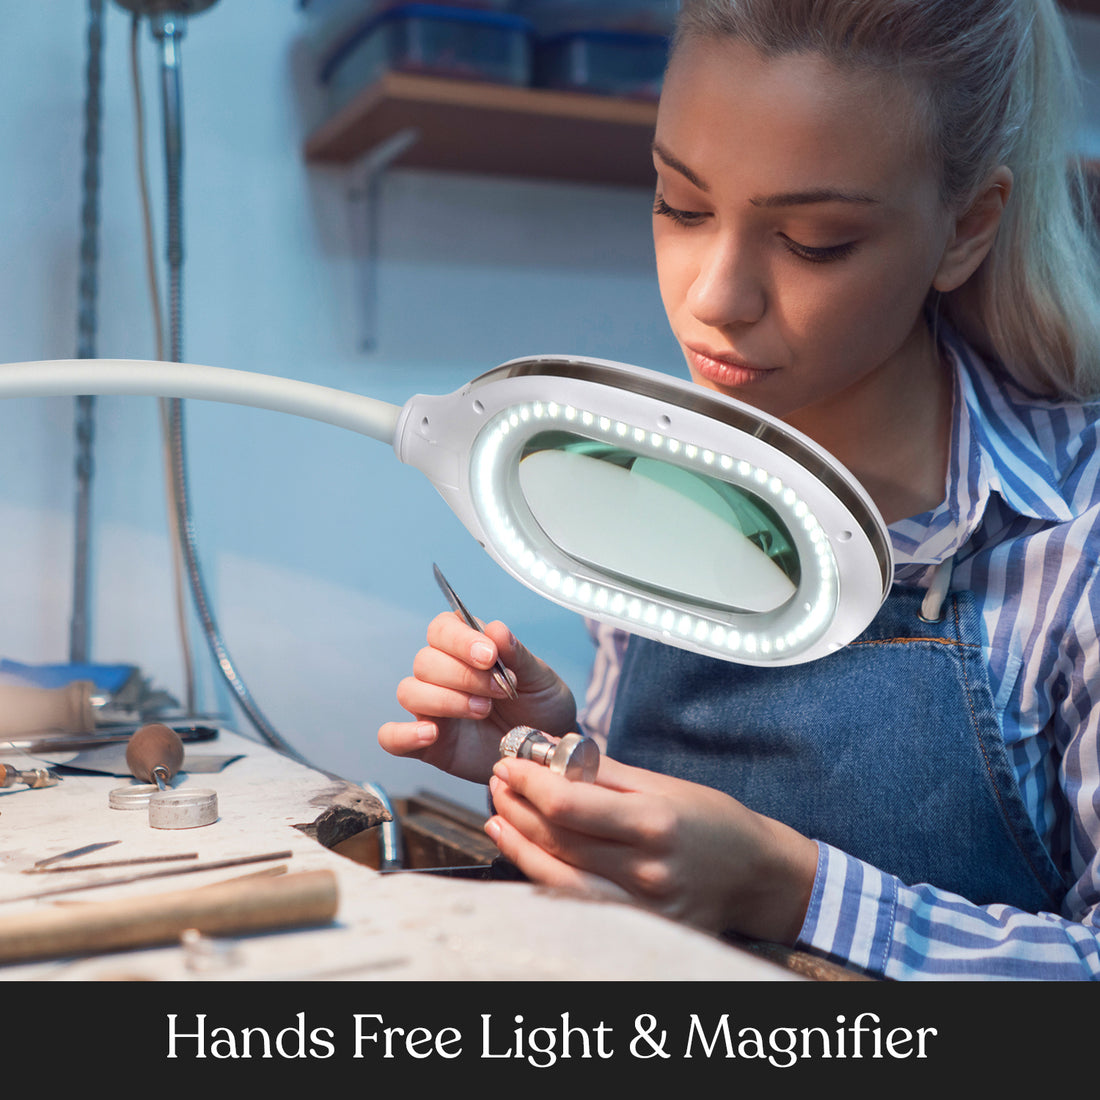 Brightech LightView Pro 3 in 1 Magnifying Lamp - Bright LED Light with Magnifier - Floor Lamp Converts to Desk - Comfort, Flexibility & Durability for Pro Uses, Crafts, Hobbies & Reading